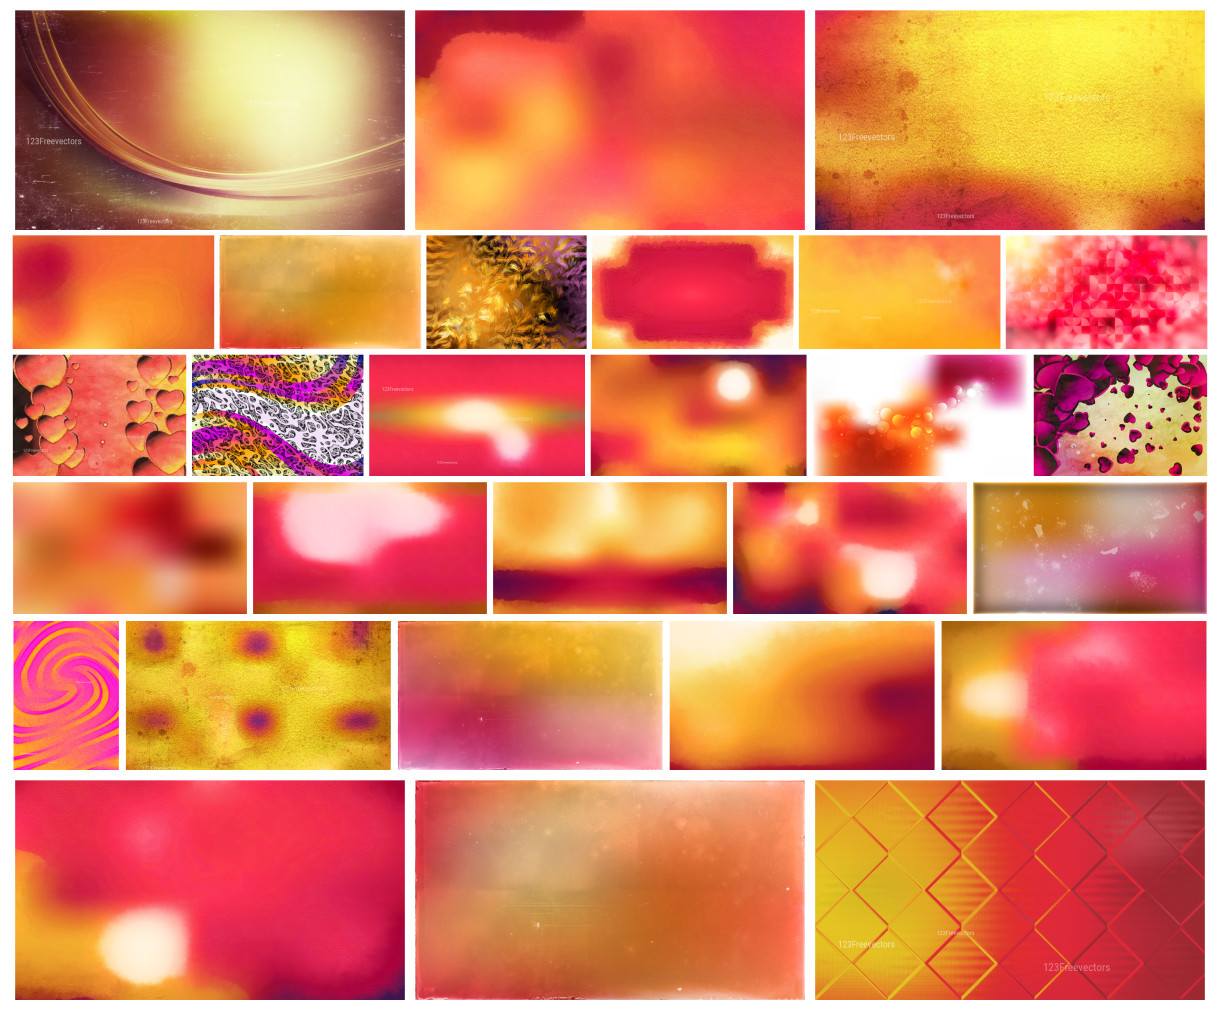 A Creative Collection of Pink and Orange Design Backgrounds